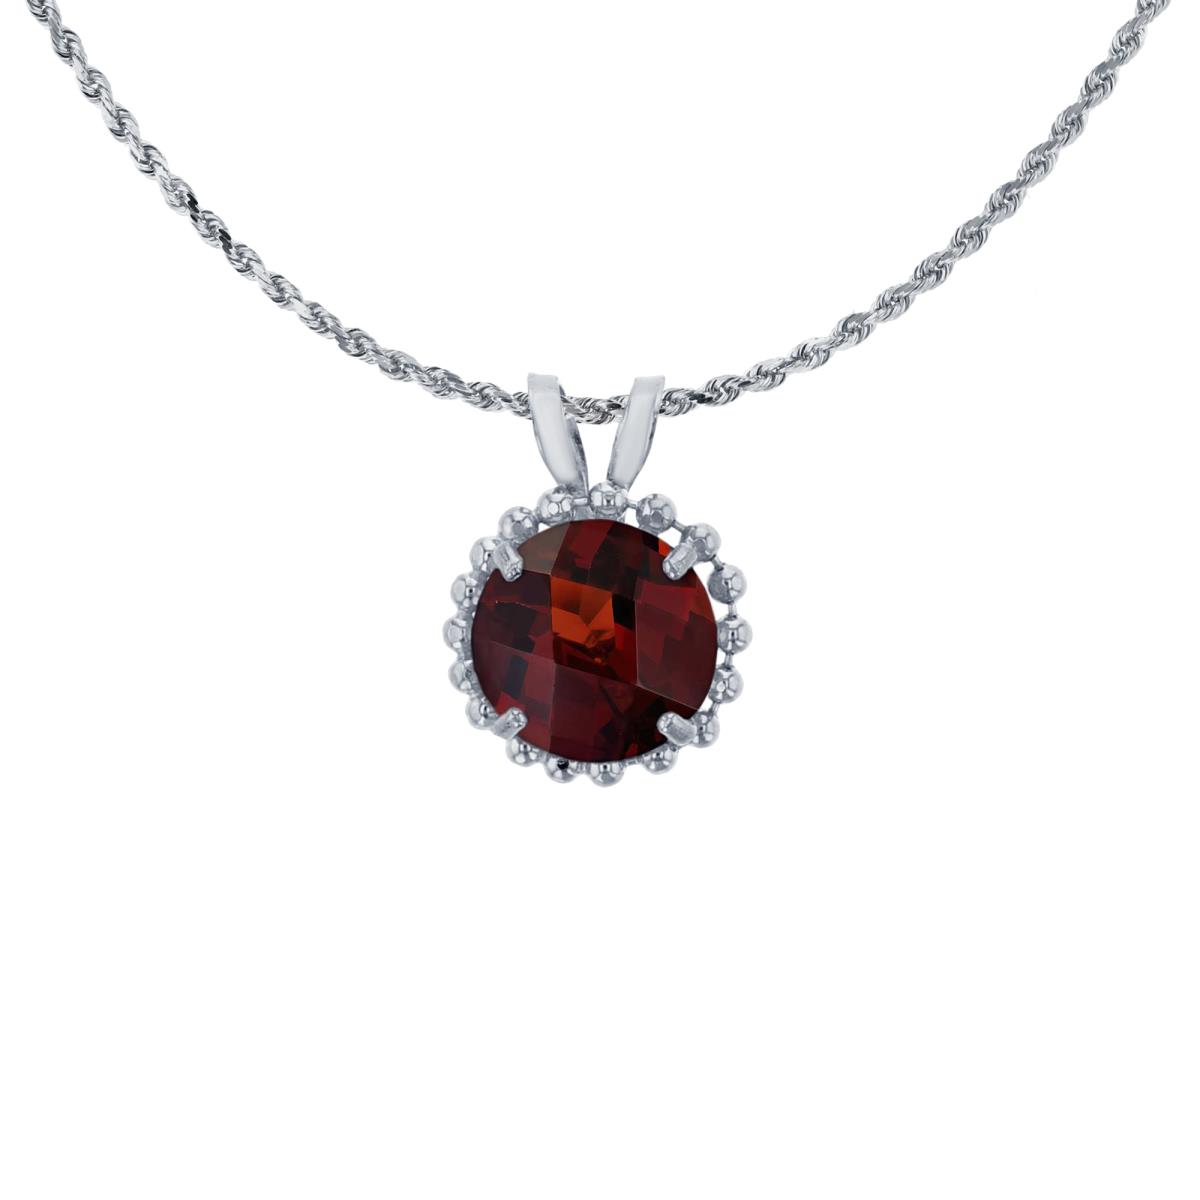 10K White Gold 6mm Rd Cut Garnet with Bead Frame Rabbit Ear 18" Necklace